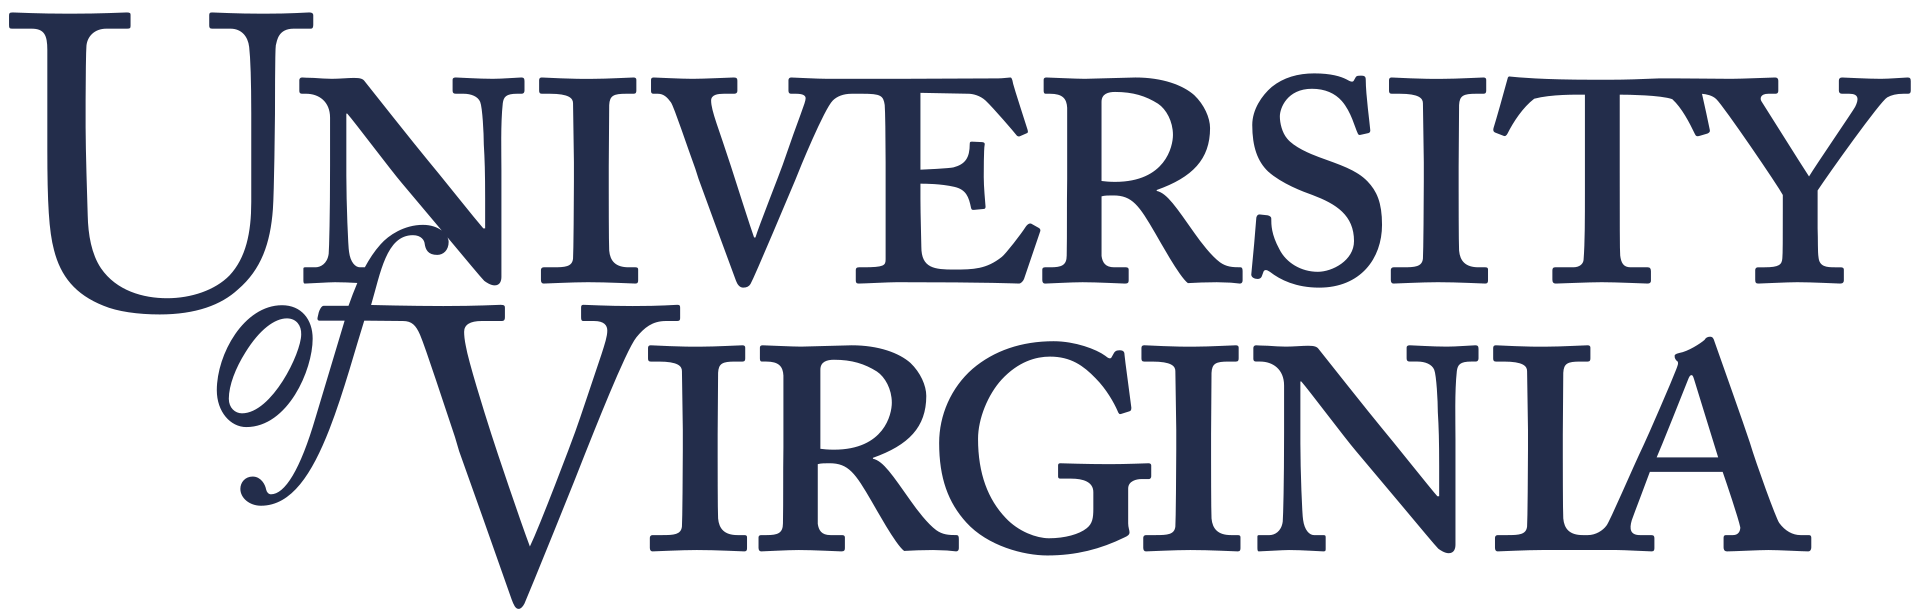 University of Virginia logo, By University of Virginia - Can be obtained from U.Va., Public Domain, https://commons.wikimedia.org/w/index.php?curid=18657033"